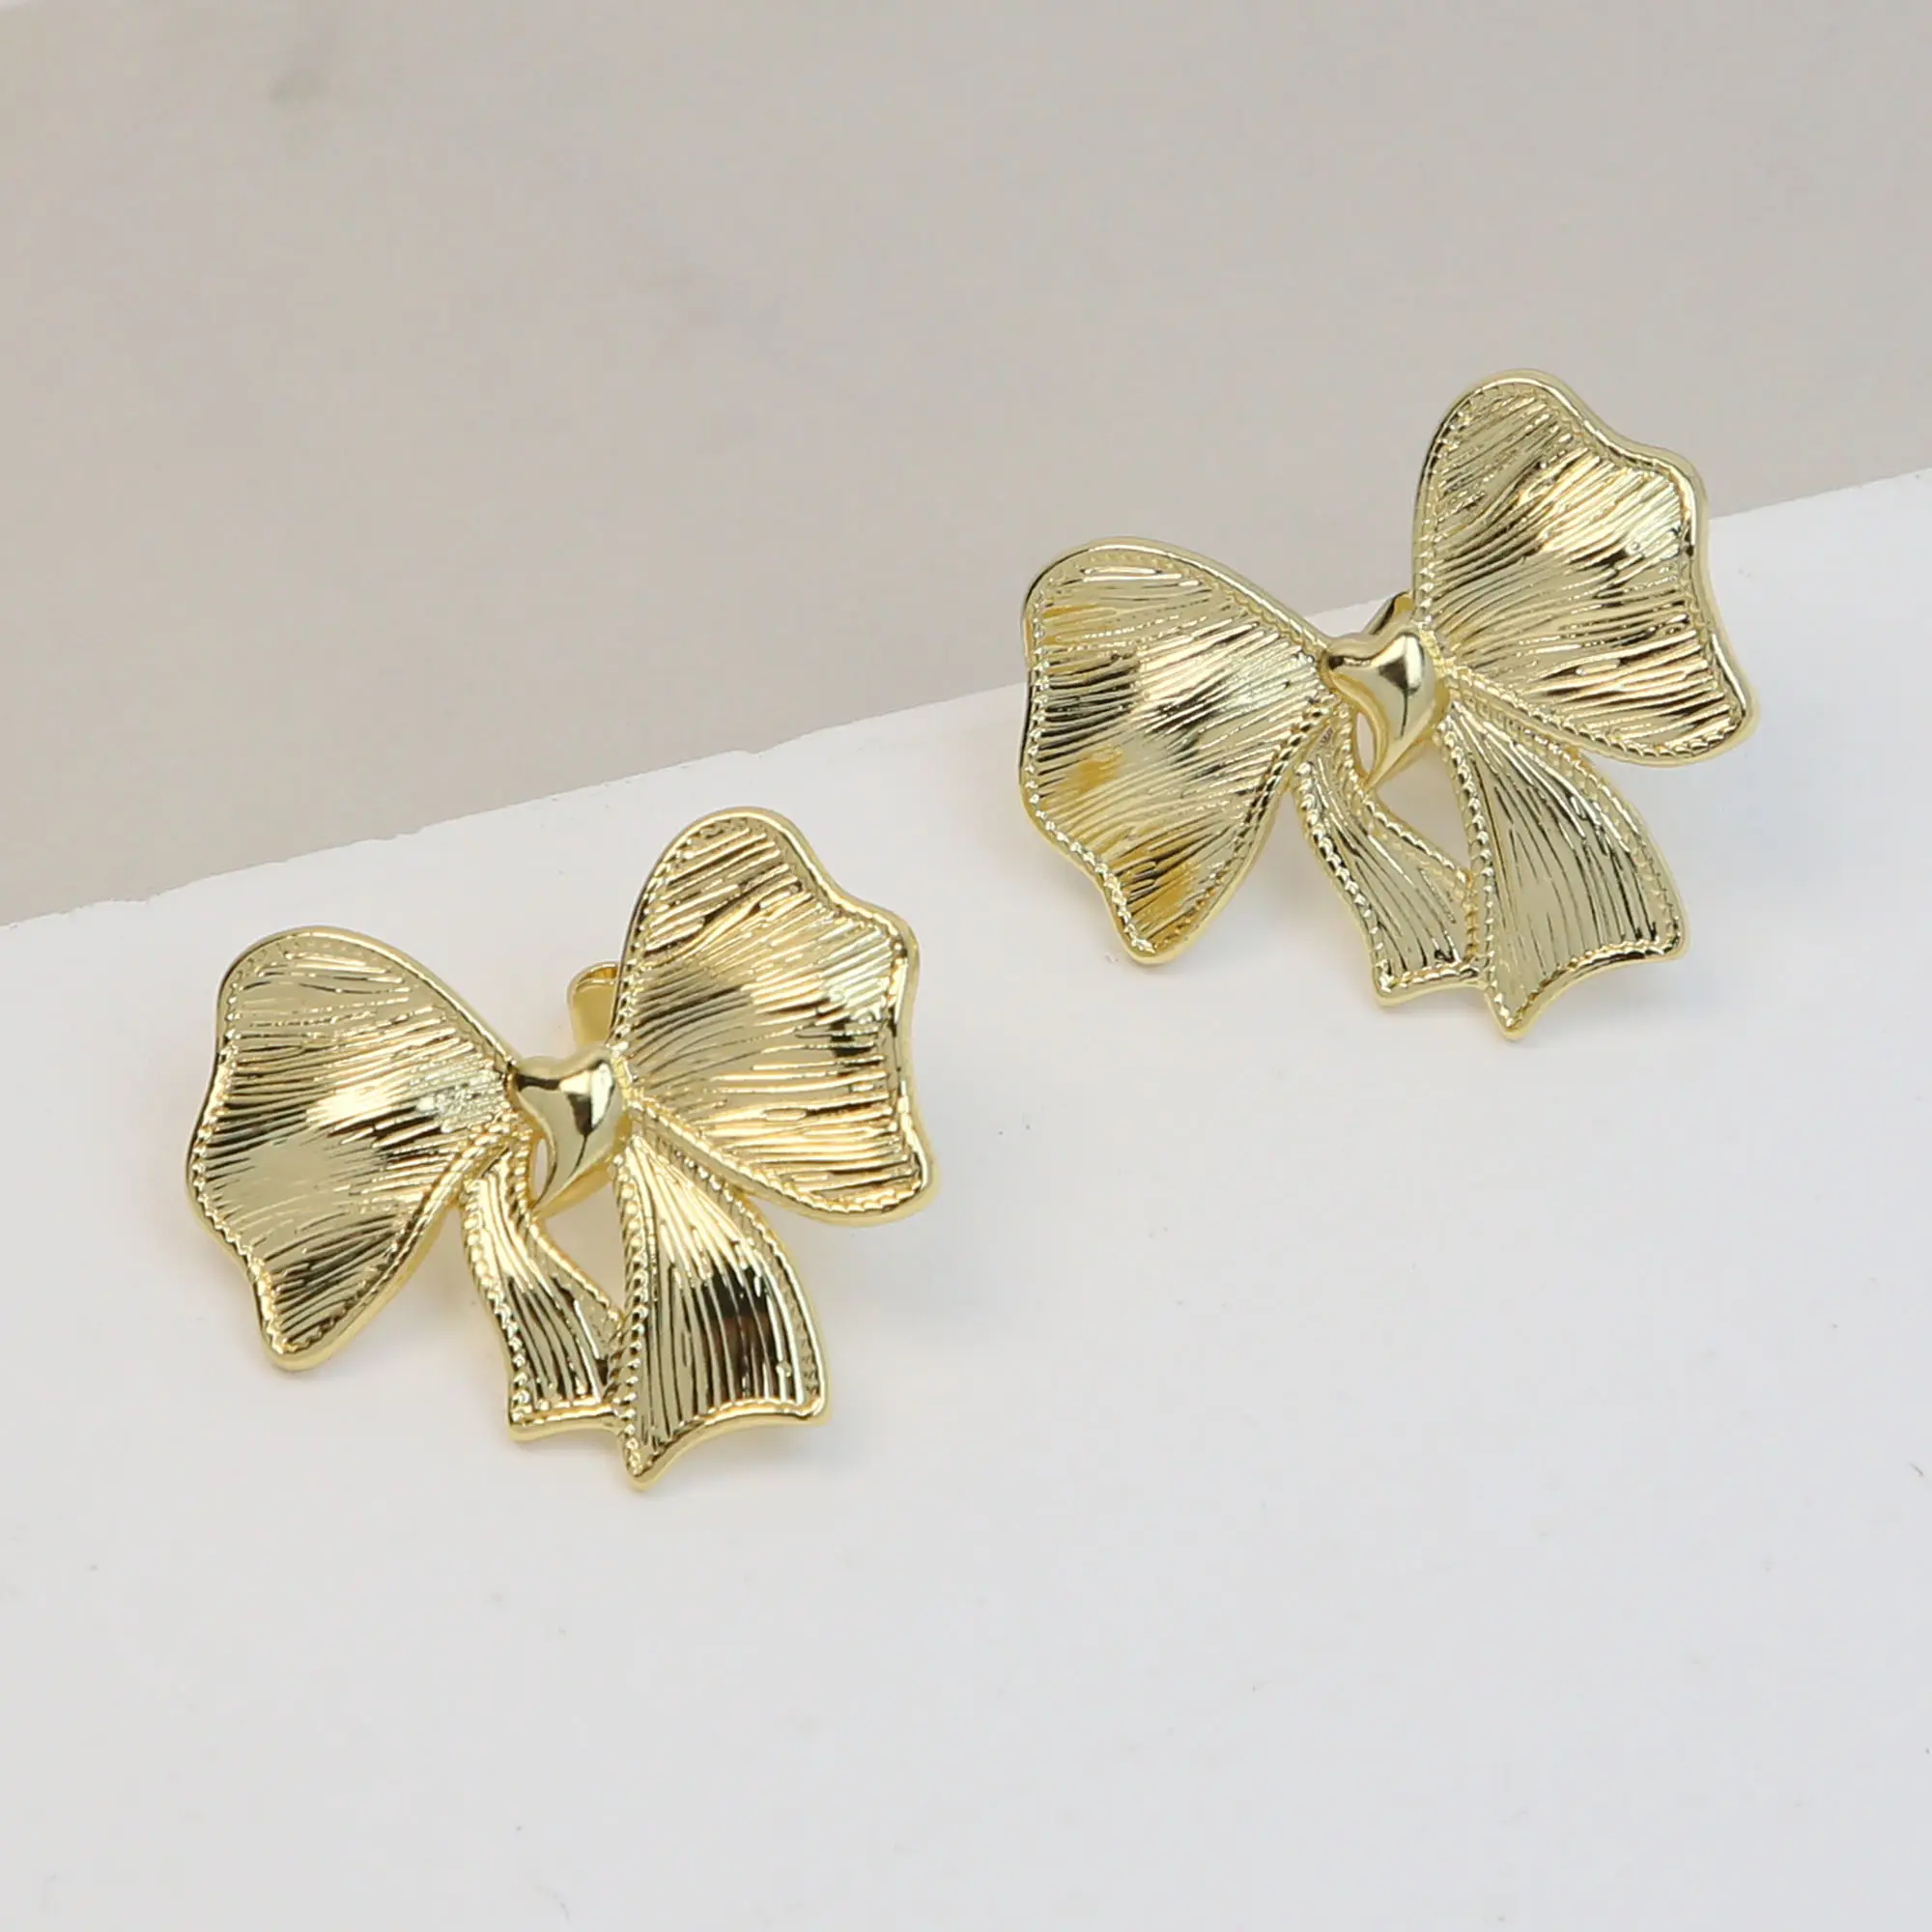 Hot Selling Classic Simple Smooth Gold Plated Metal Bow Earrings Exquisite Non-fading Waterproof Brass Women Earrings